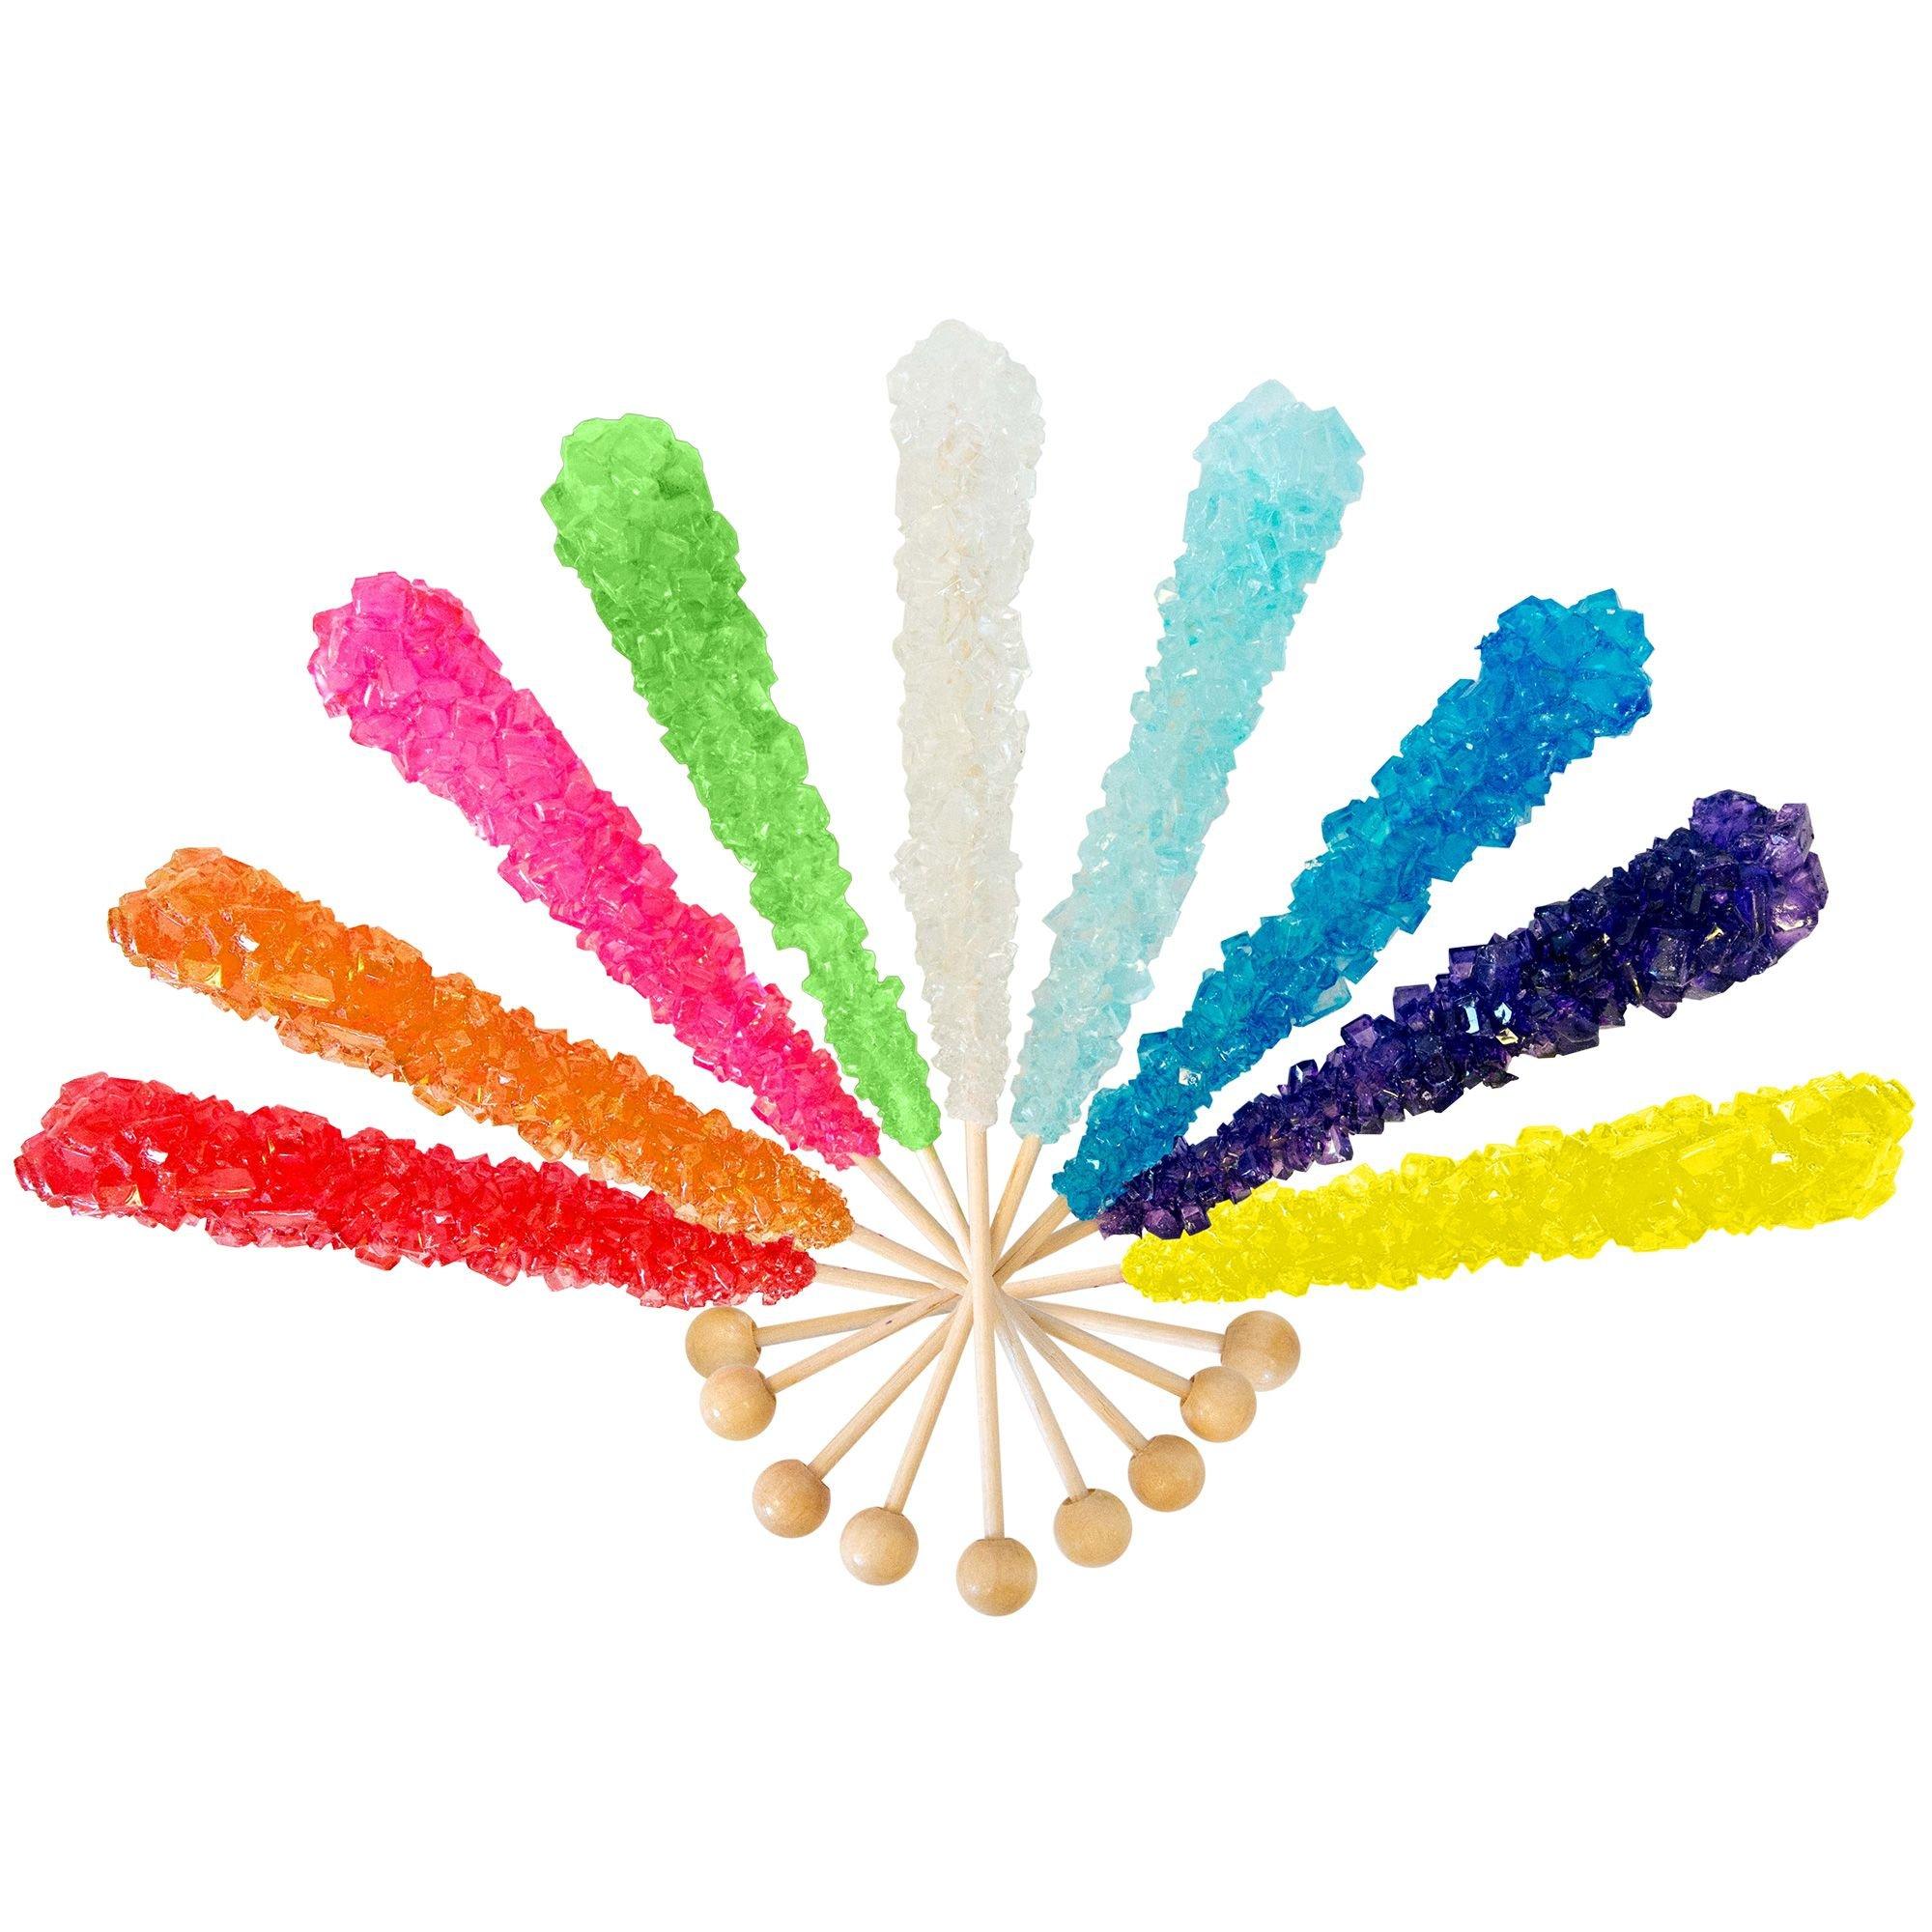 Rainbow Rock Candy Sticks, 18ct - Assorted Flavors